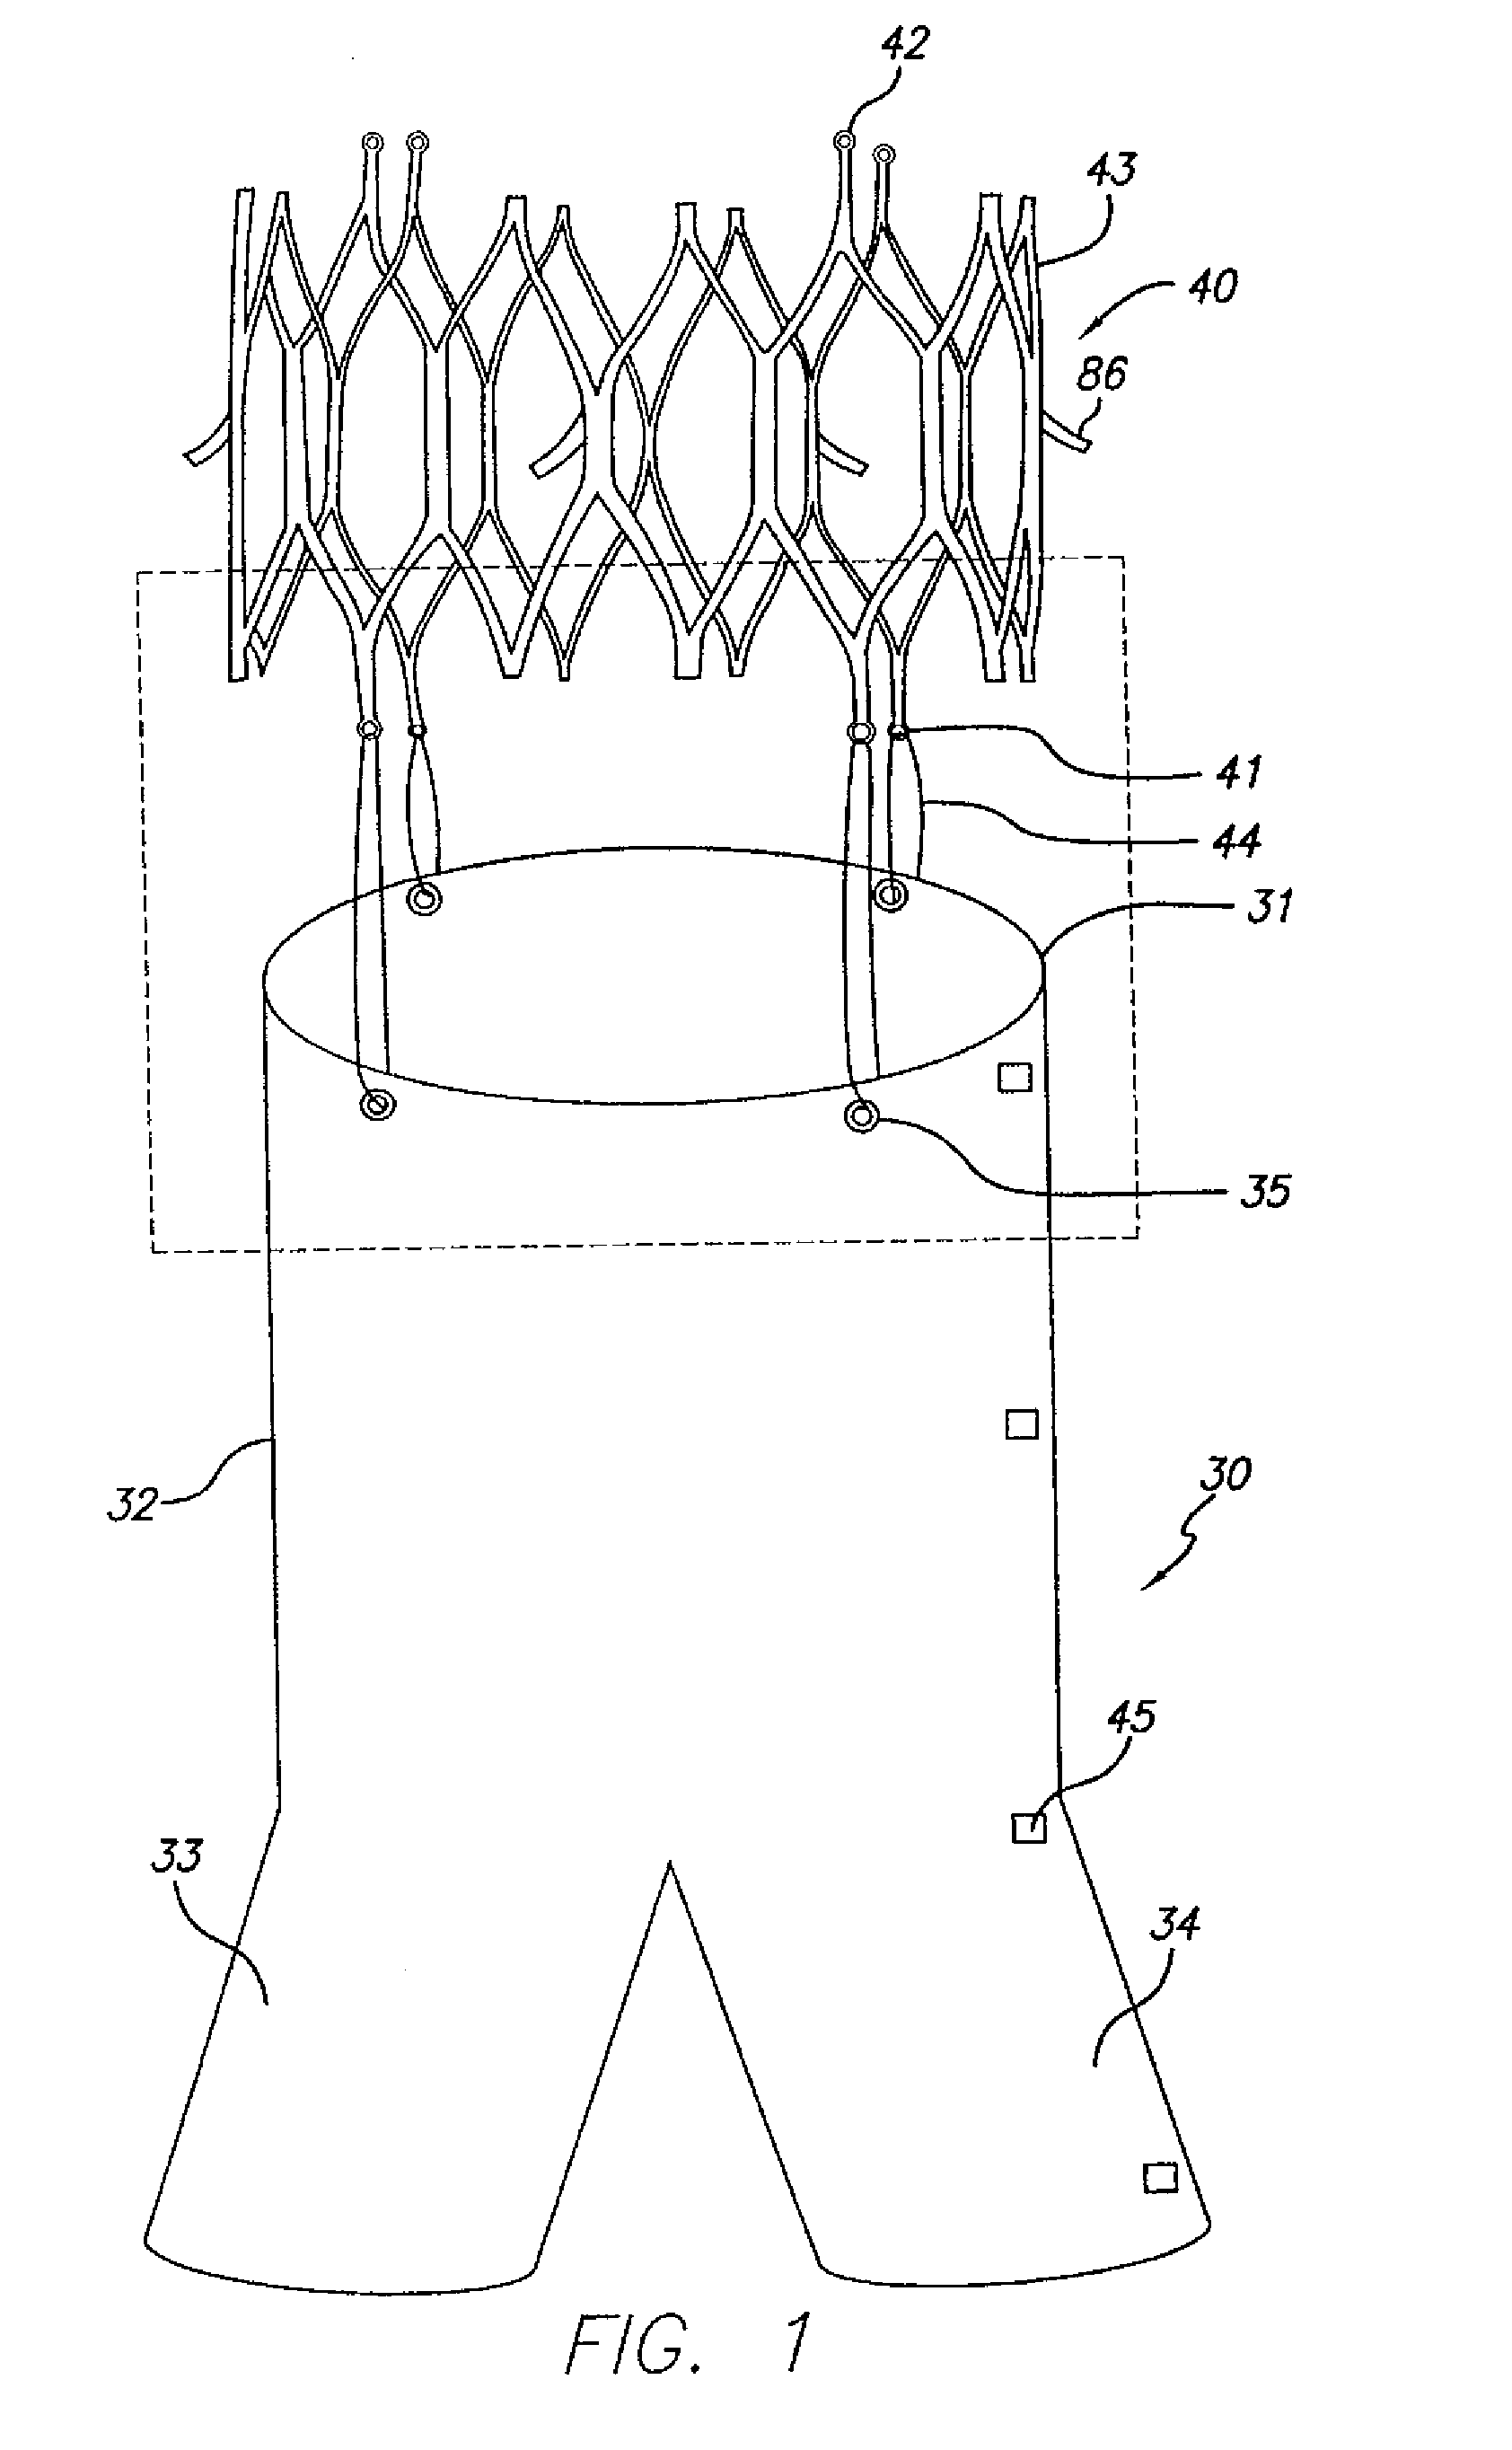 Endovascular graft device and methods for attaching components thereof